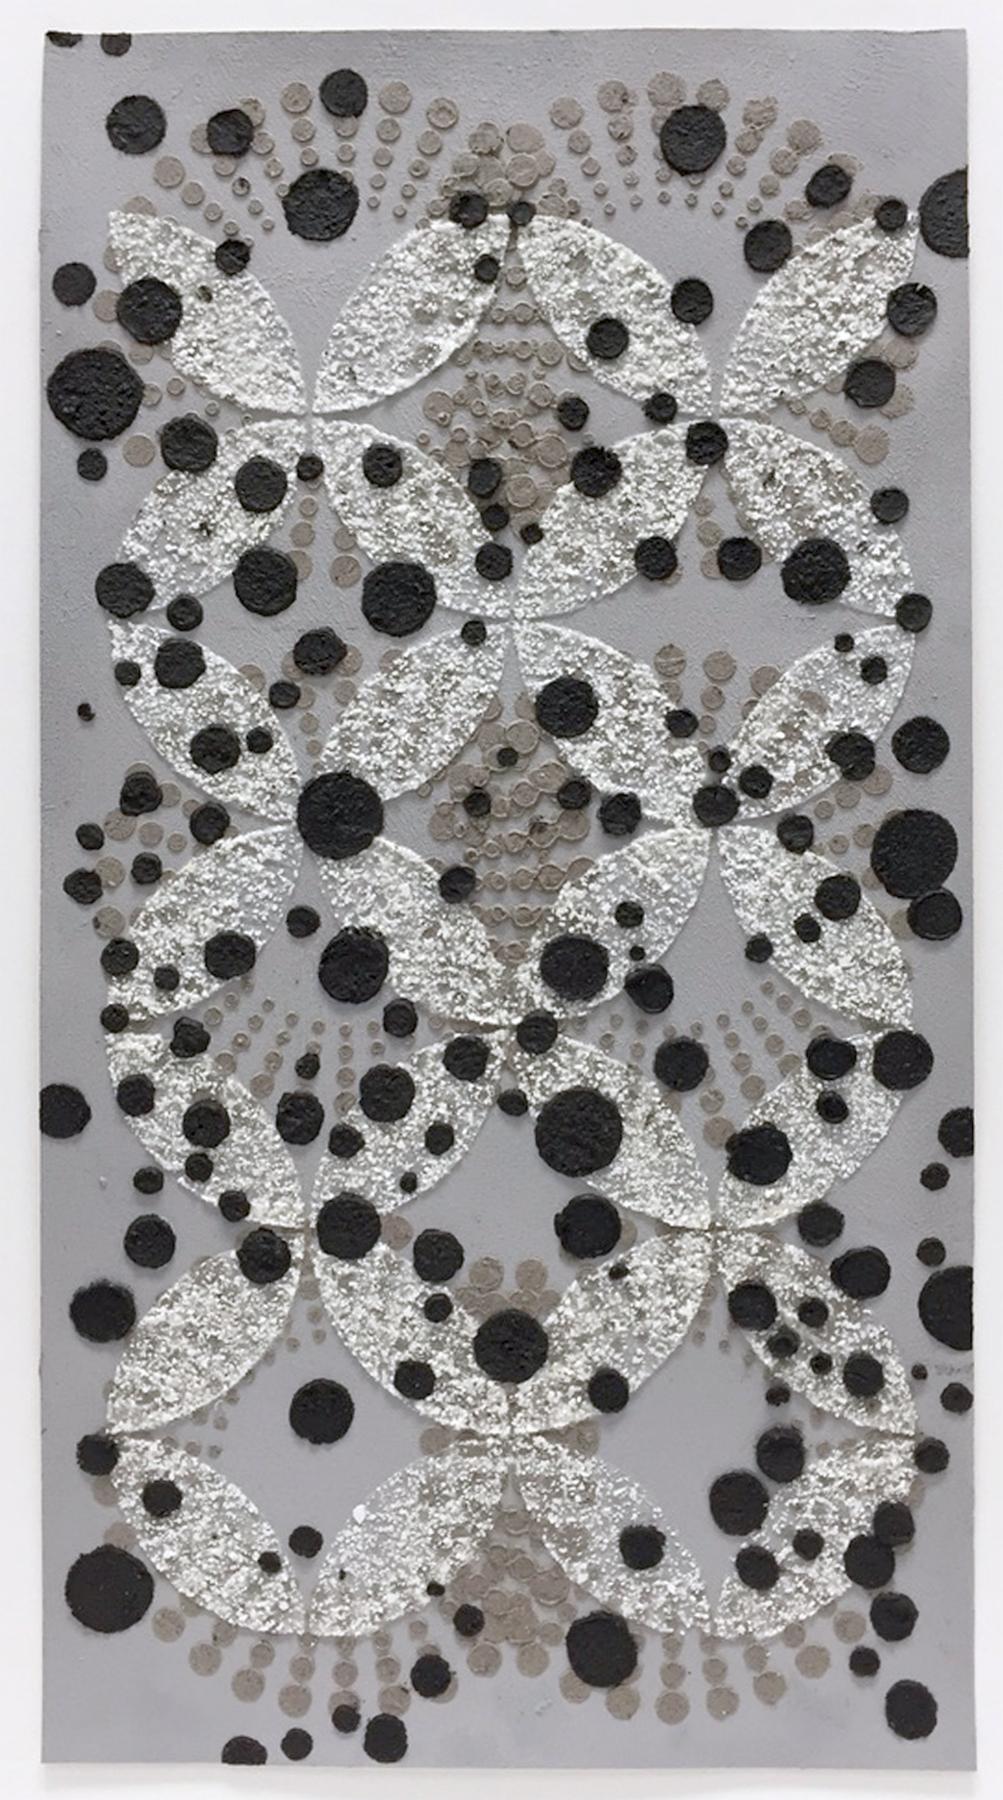 Untitled Black Dots on Two Patterns, Mixed Media, Eggshell, Ash Black on Gray - Mixed Media Art by Eleanor White